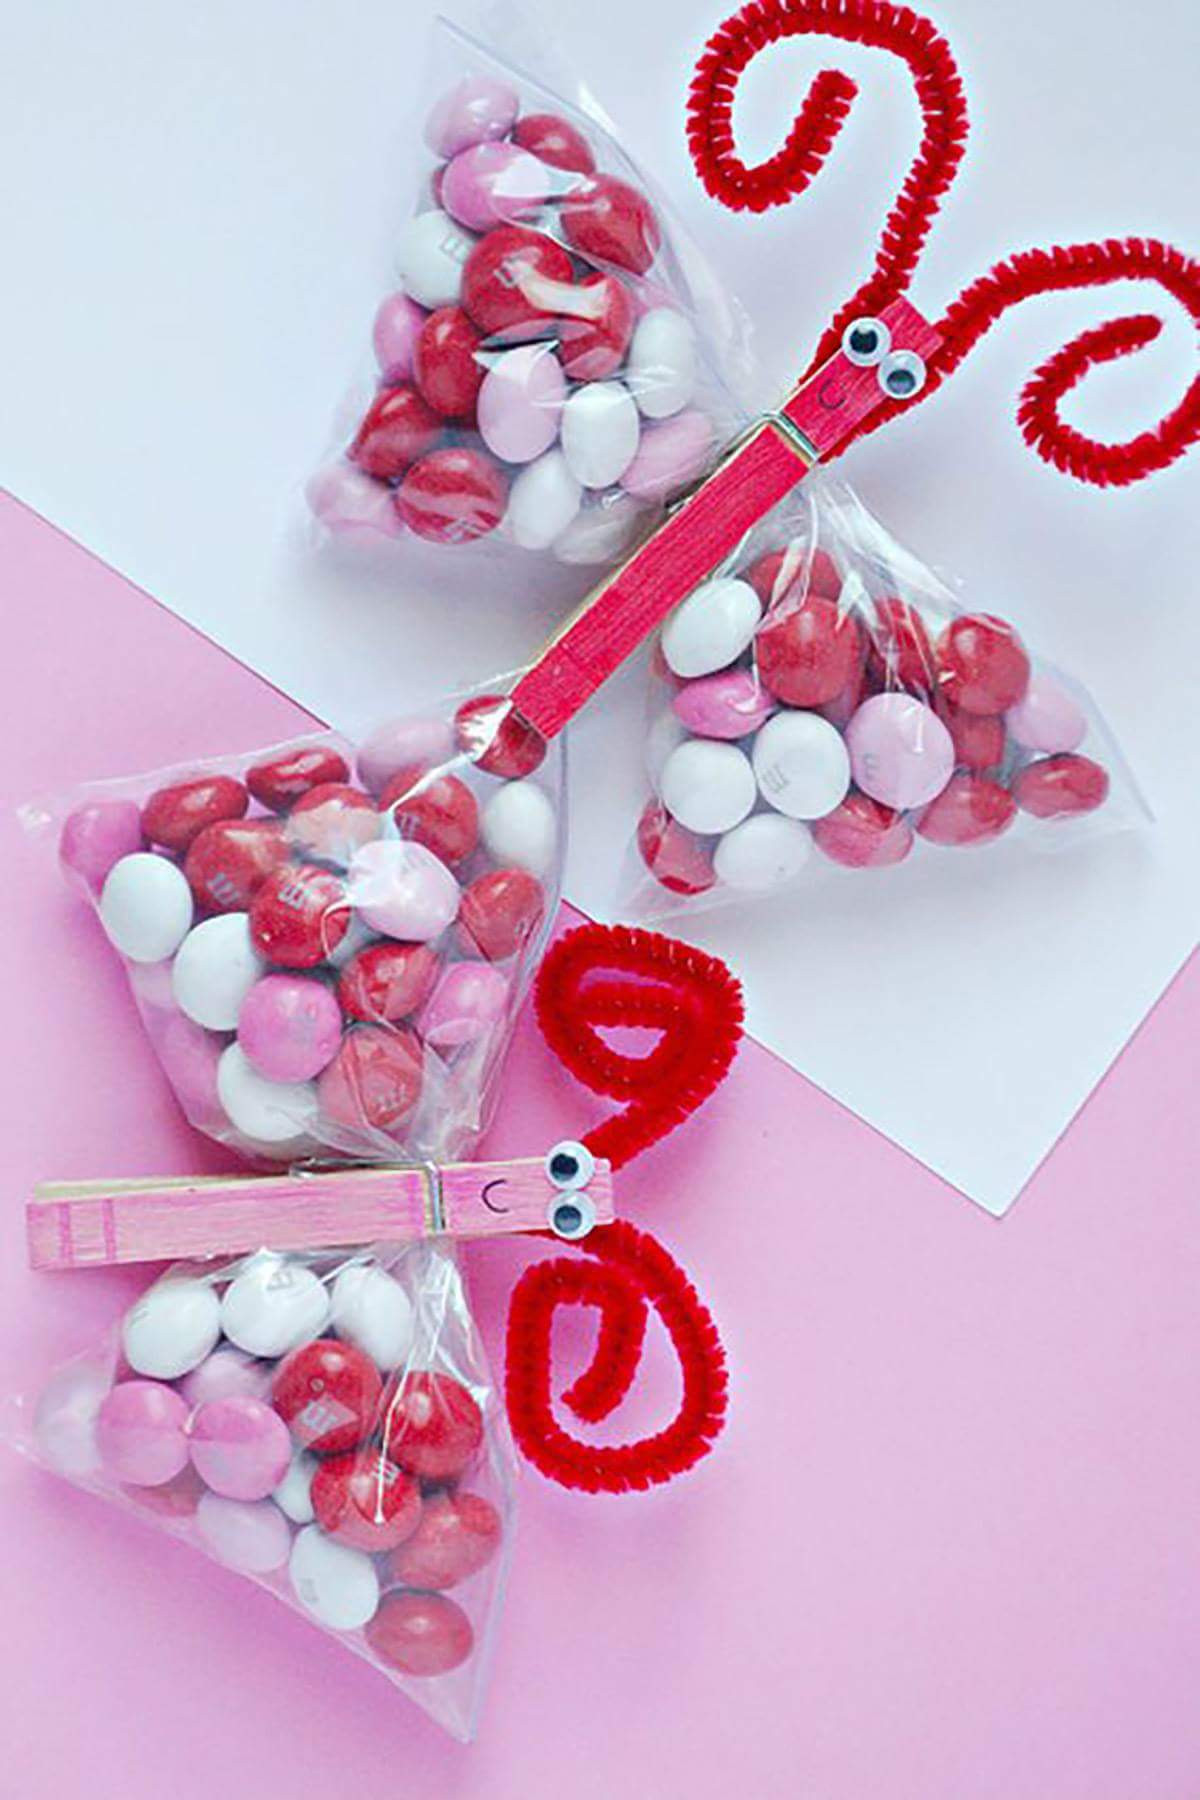 Arts And Crafts Valentines Gift Ideas
 40 Easy DIY Valentine’s Day Craft Ideas to Make Your